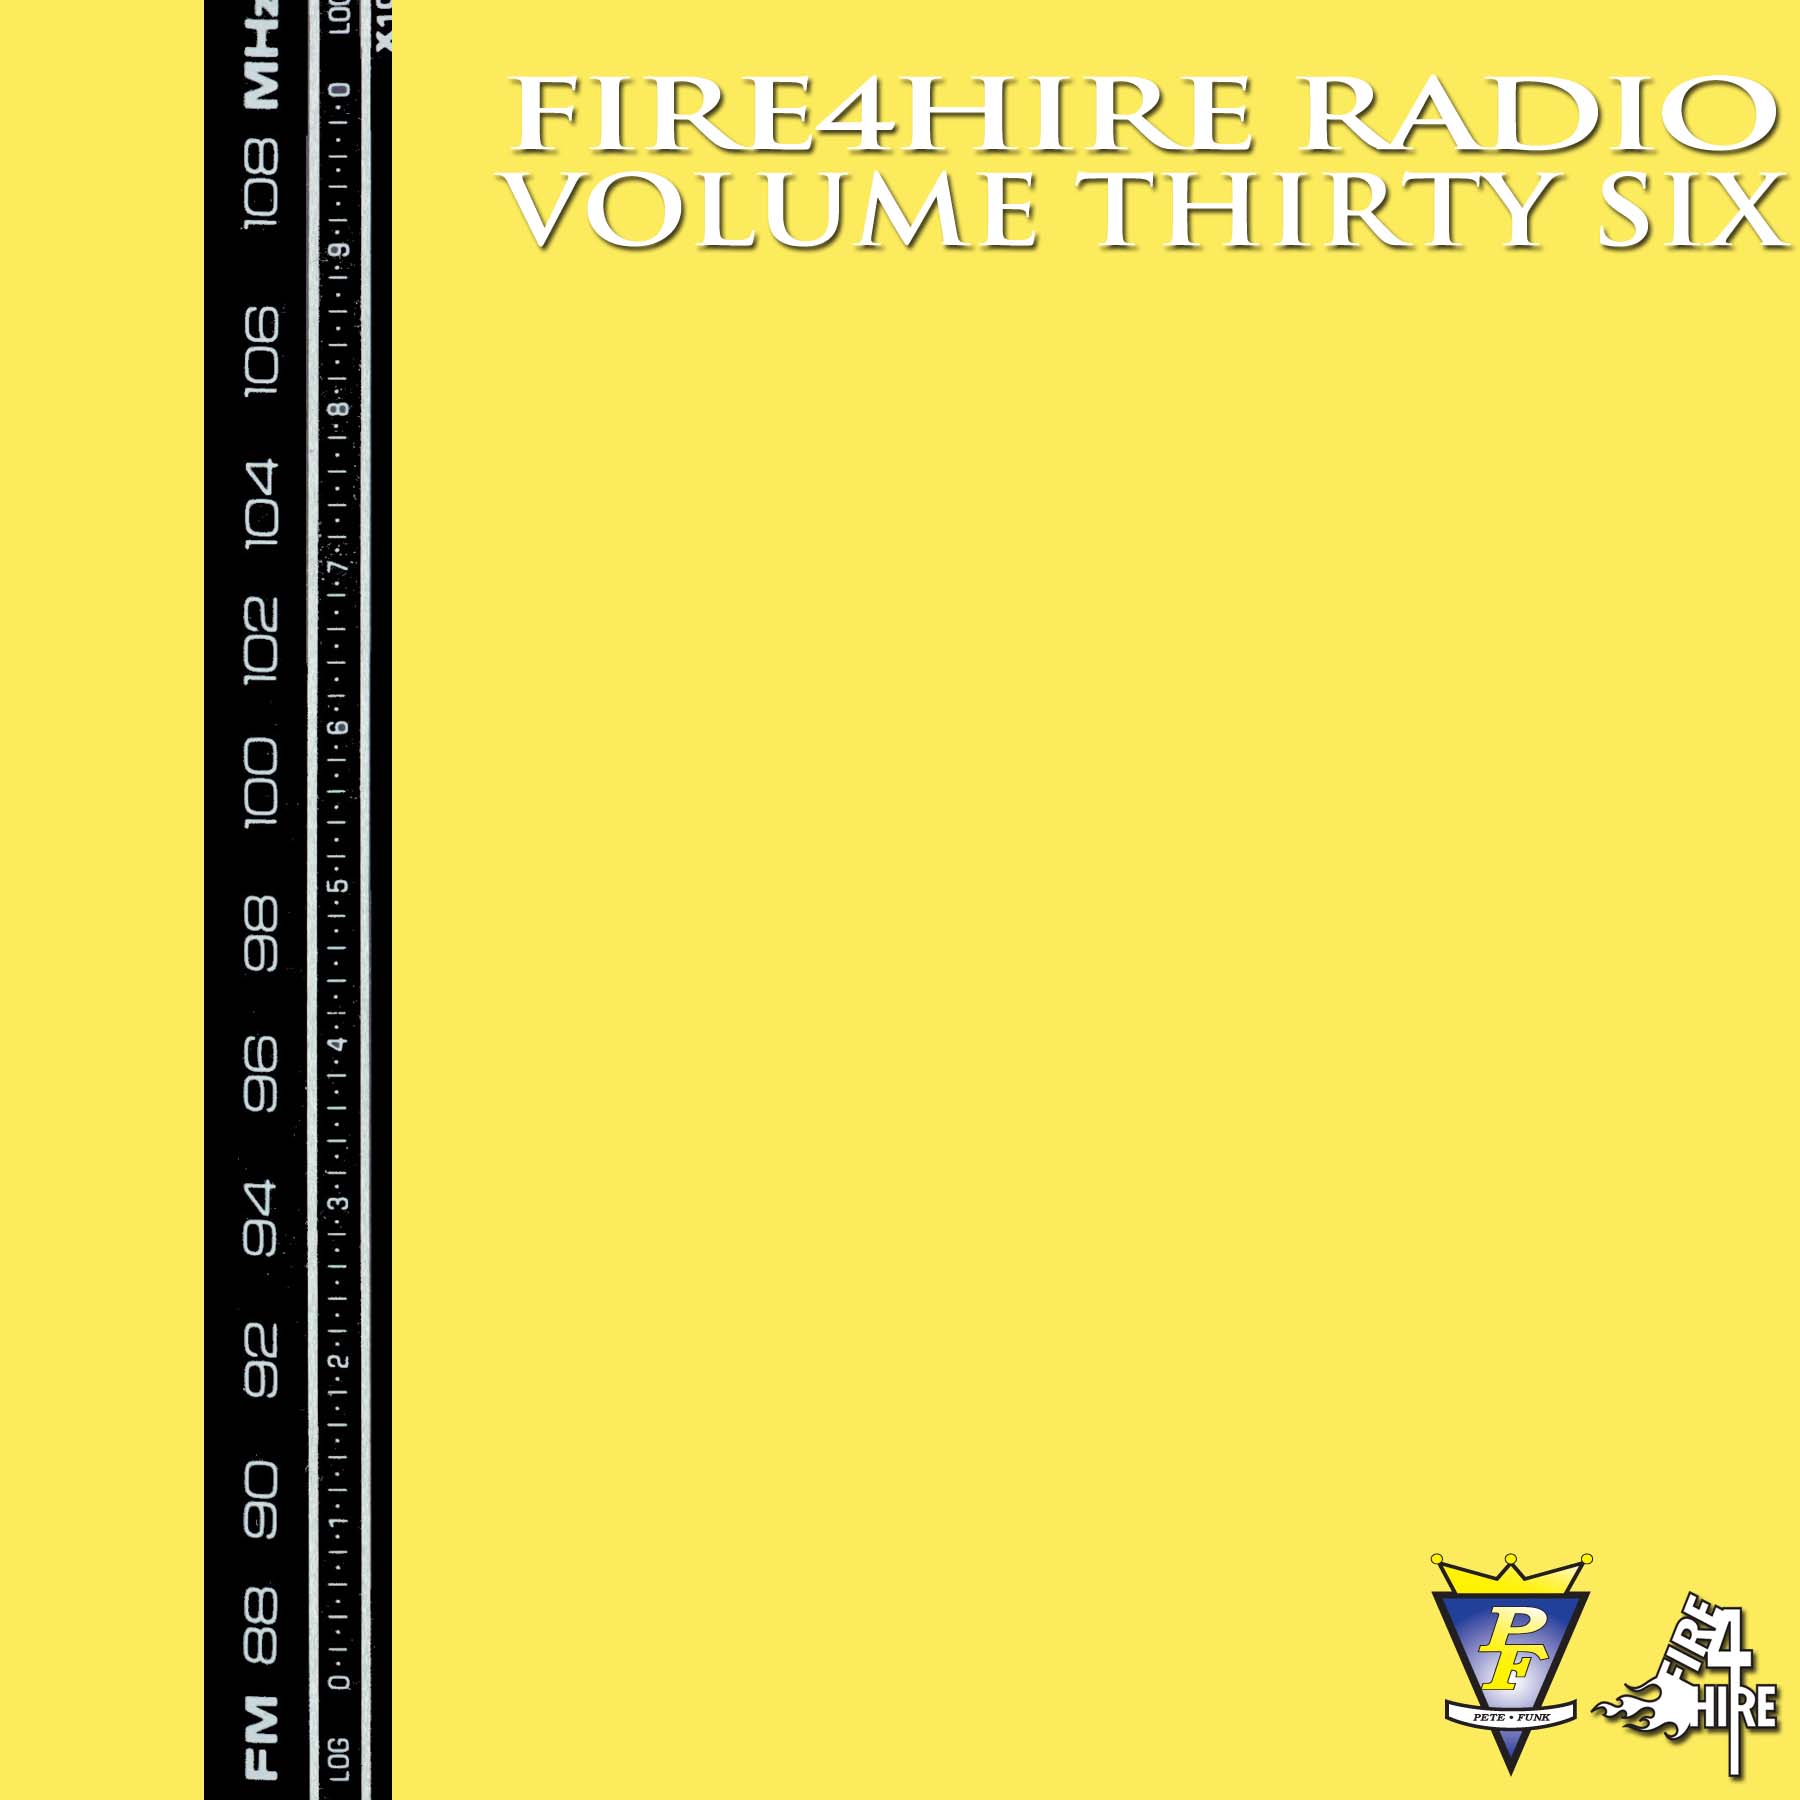 Fire 4 Hire Radio Volume 36 by Pete Funk